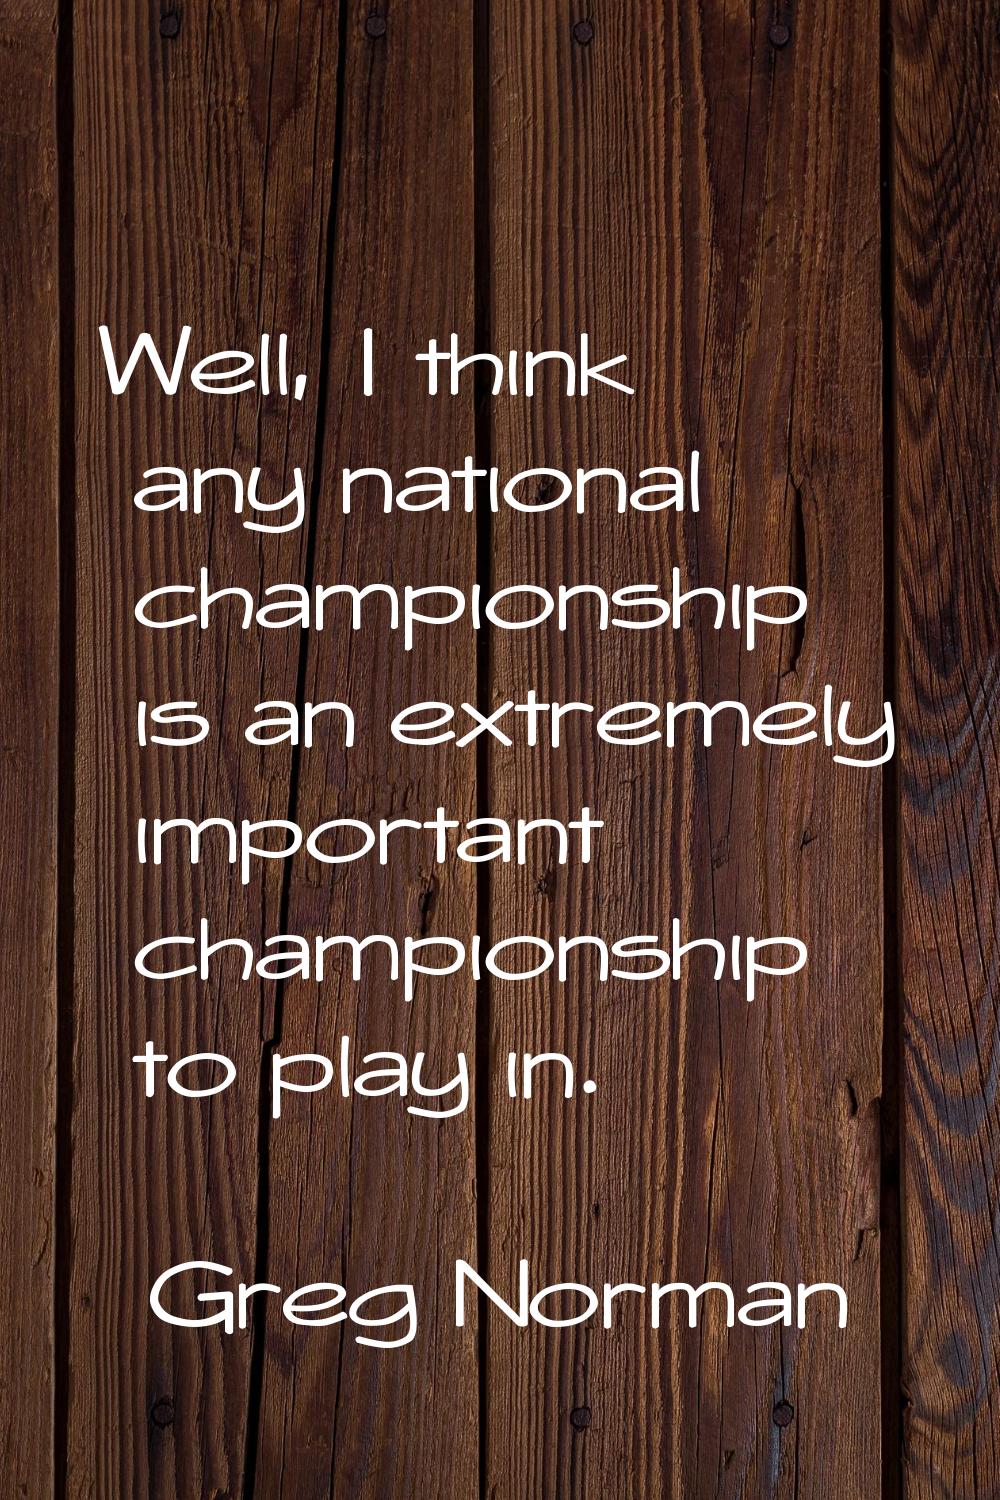 Well, I think any national championship is an extremely important championship to play in.